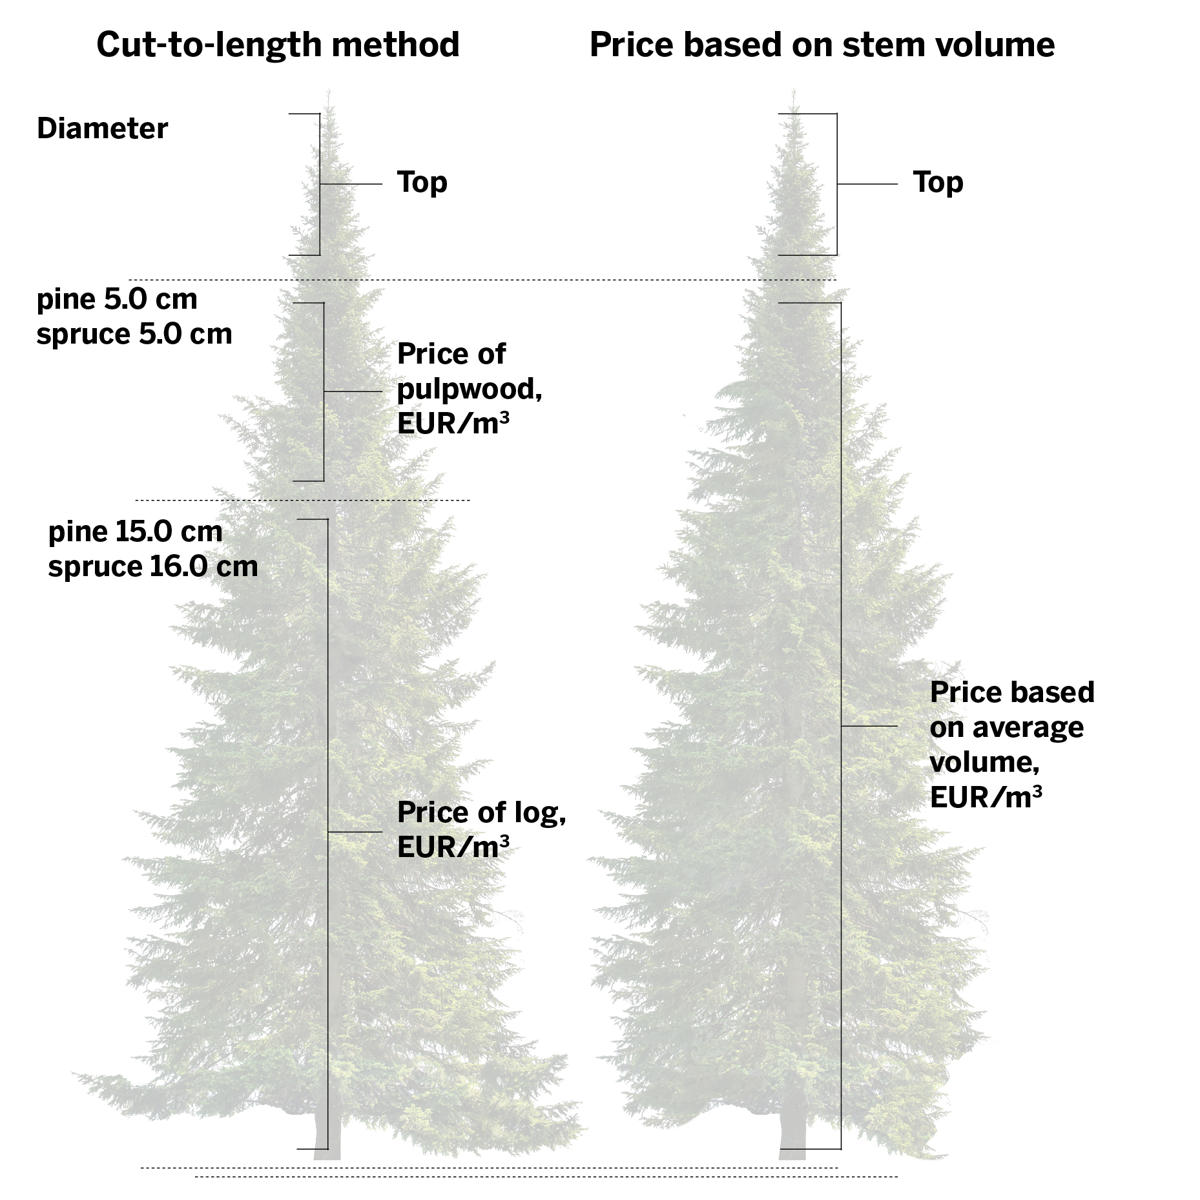 Comparison of stem volume based pricing and traditional log-pulpwood pricing